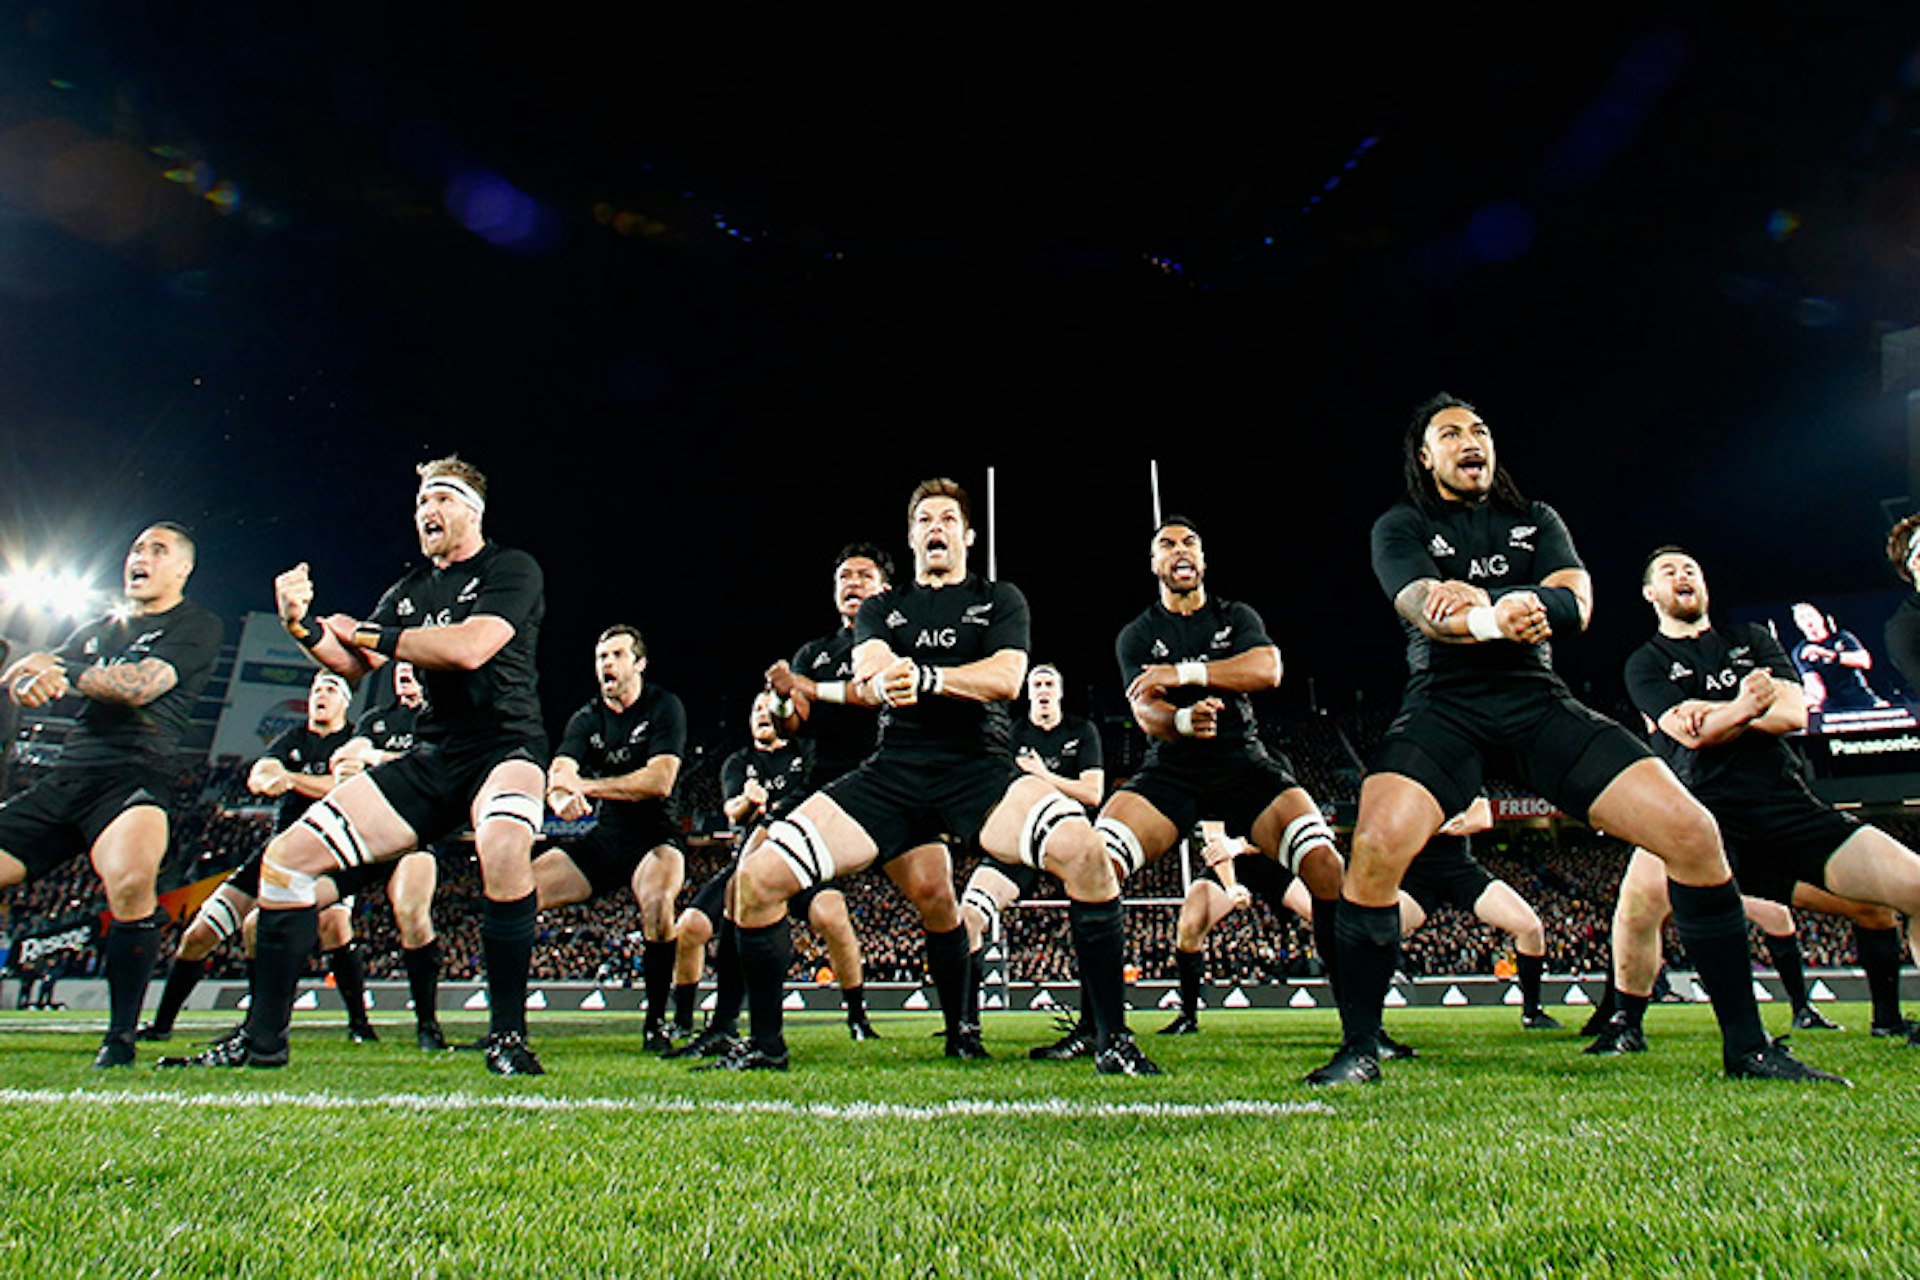 The All Blacks performing the haka at Eden Park.